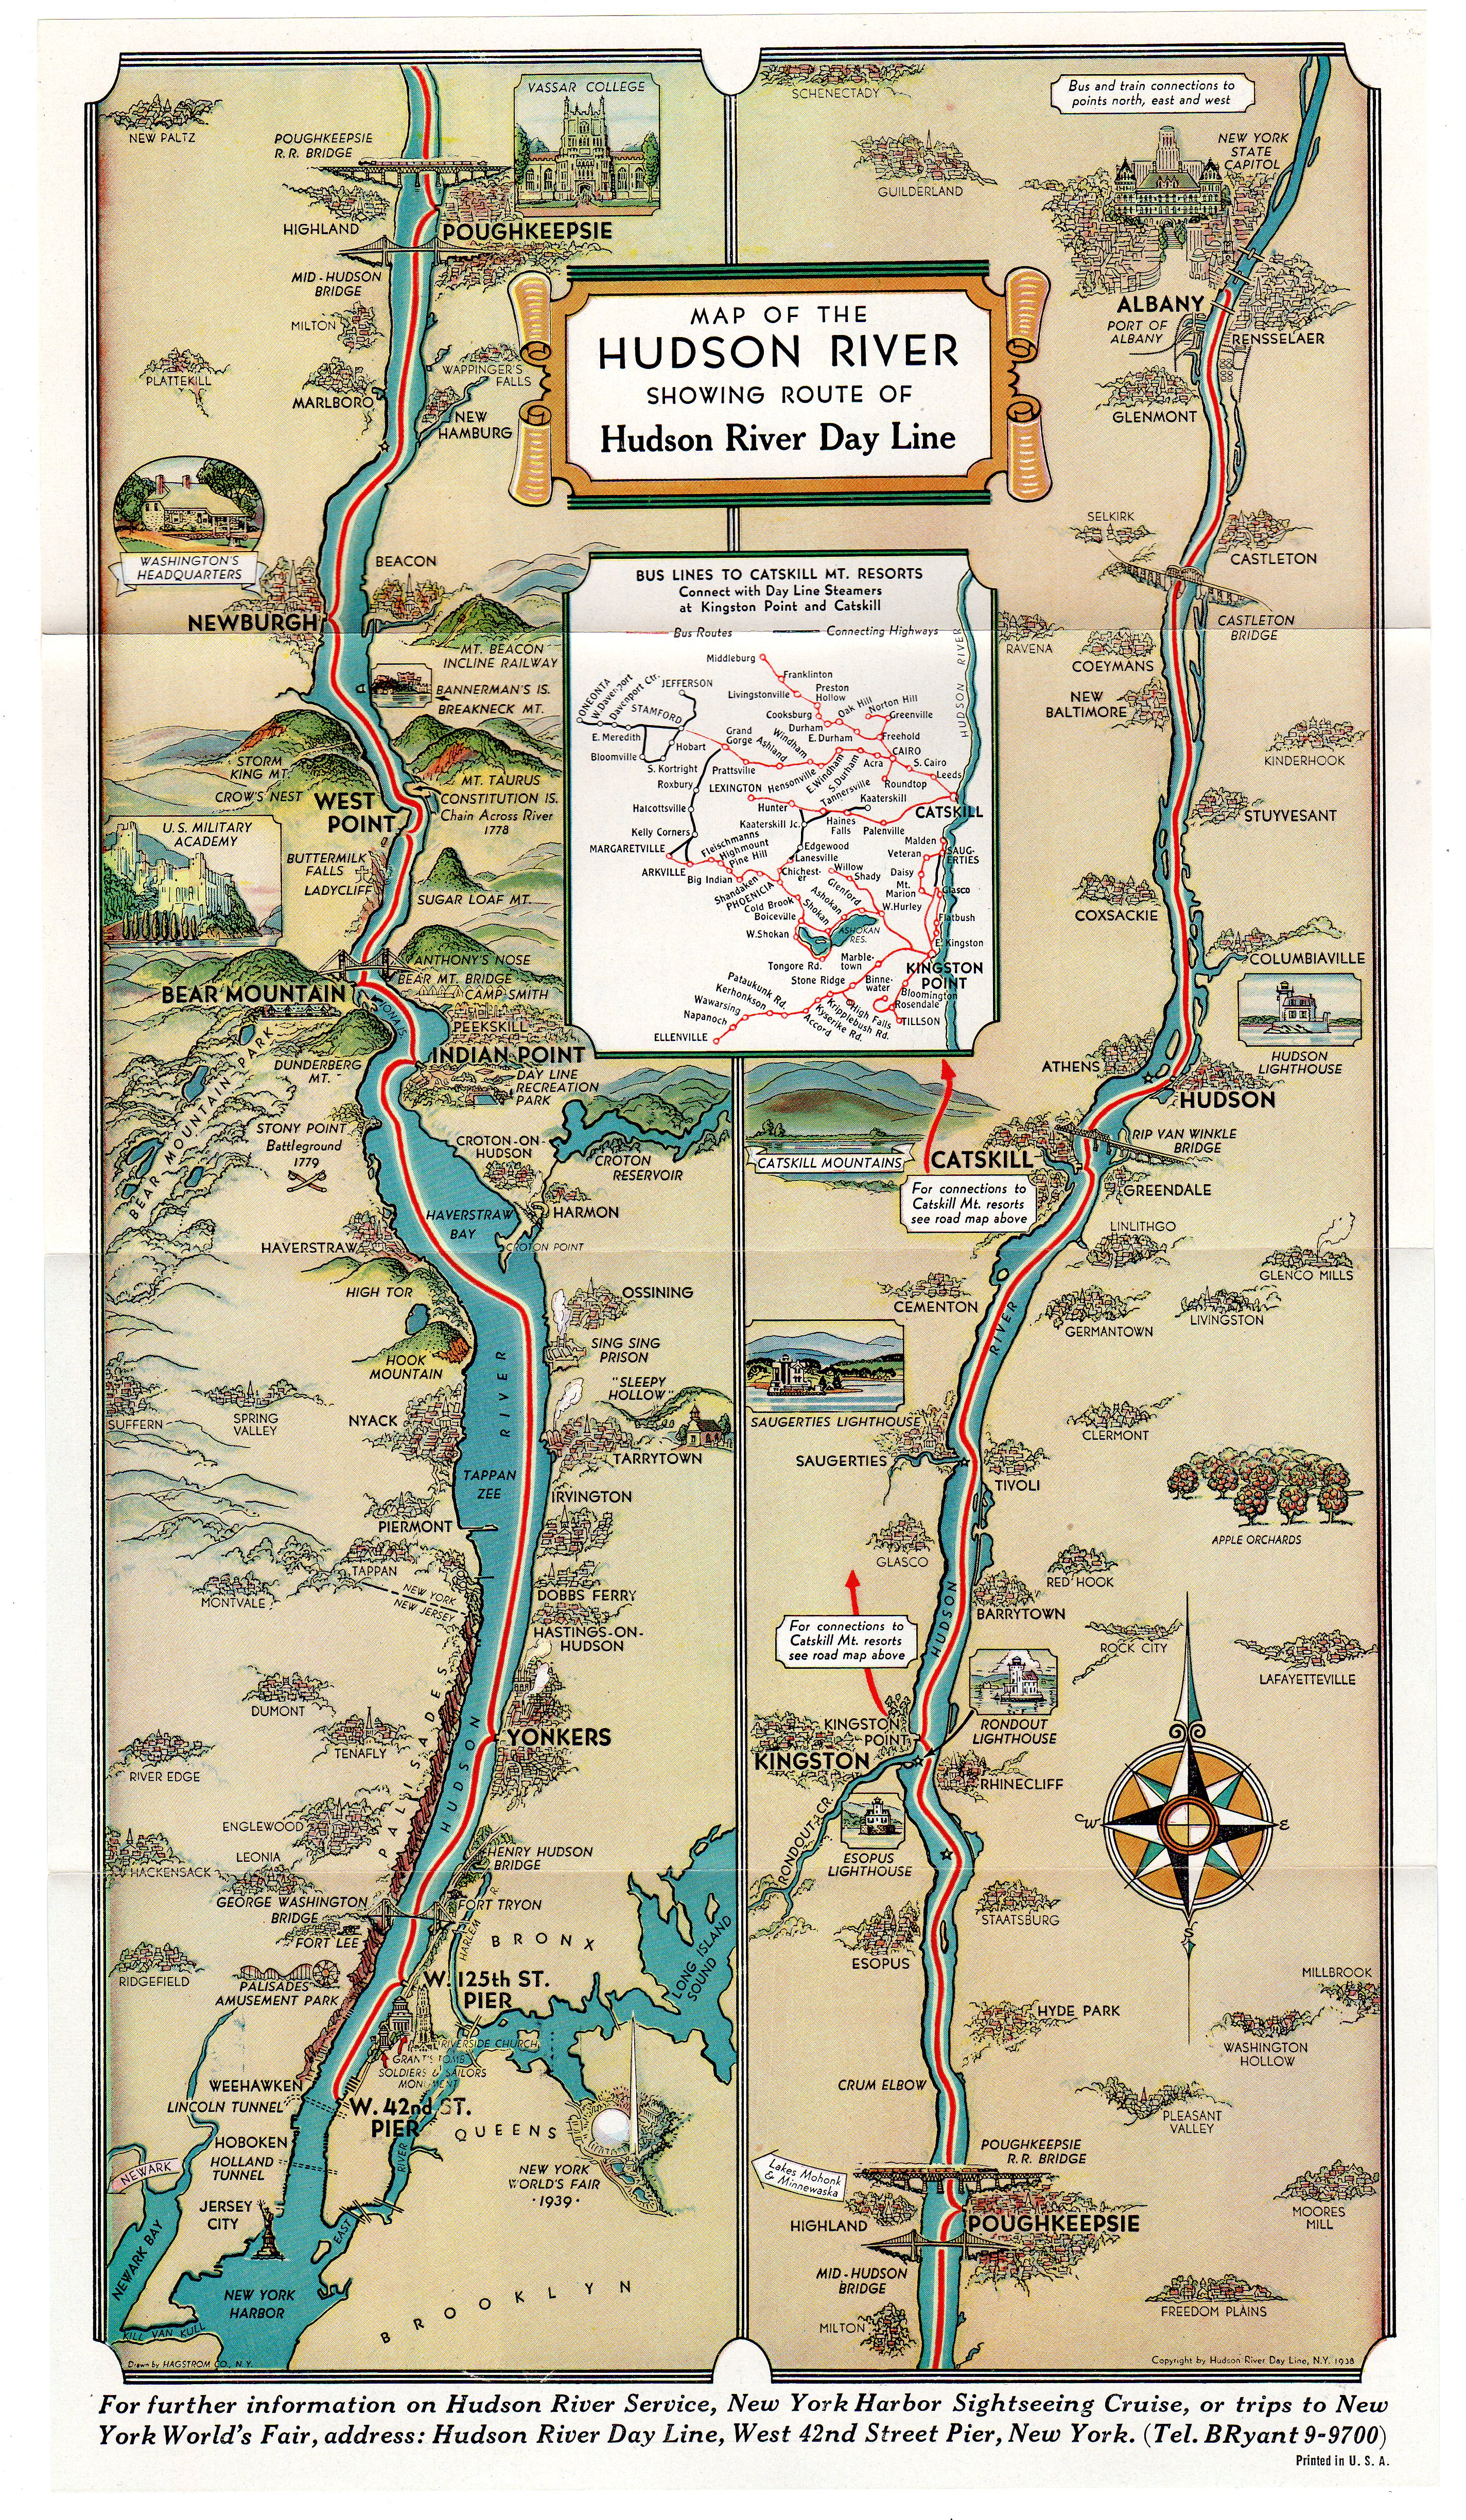 Map of the Hudson River showing route of Hudson River Day Line. Donald C. Ringwald Collection, Hudson River Maritime Museum